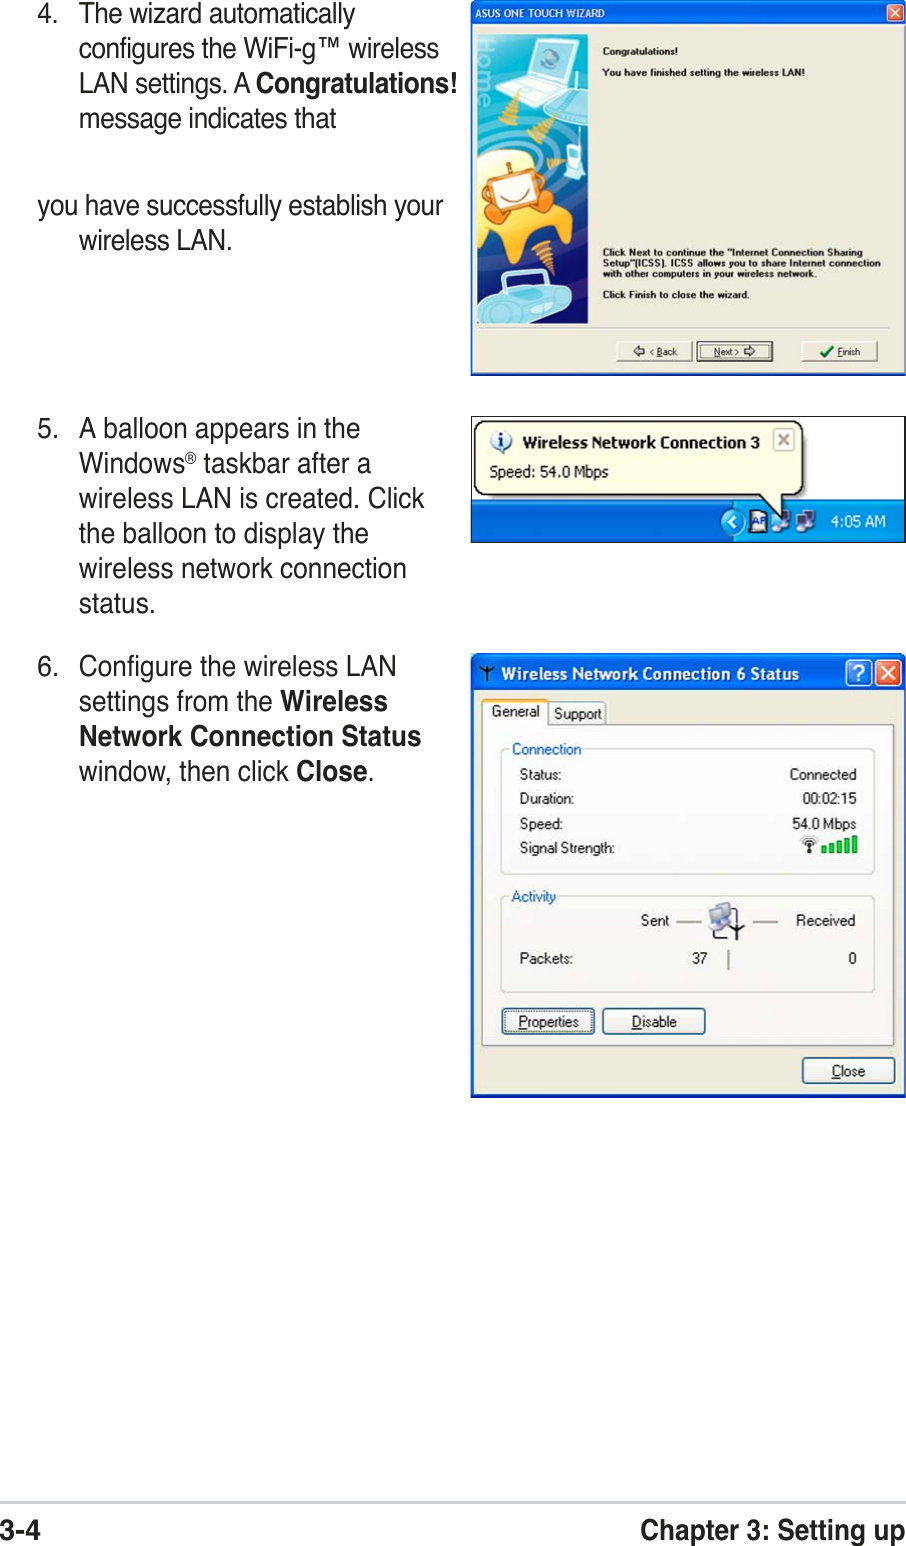 3-4Chapter 3: Setting up4. The wizard automaticallyconfigures the WiFi-g™ wirelessLAN settings. A Congratulations!message indicates thatyou have successfully establish yourwireless LAN.5. A balloon appears in theWindows® taskbar after awireless LAN is created. Clickthe balloon to display thewireless network connectionstatus.6. Configure the wireless LANsettings from the WirelessNetwork Connection Statuswindow, then click Close.